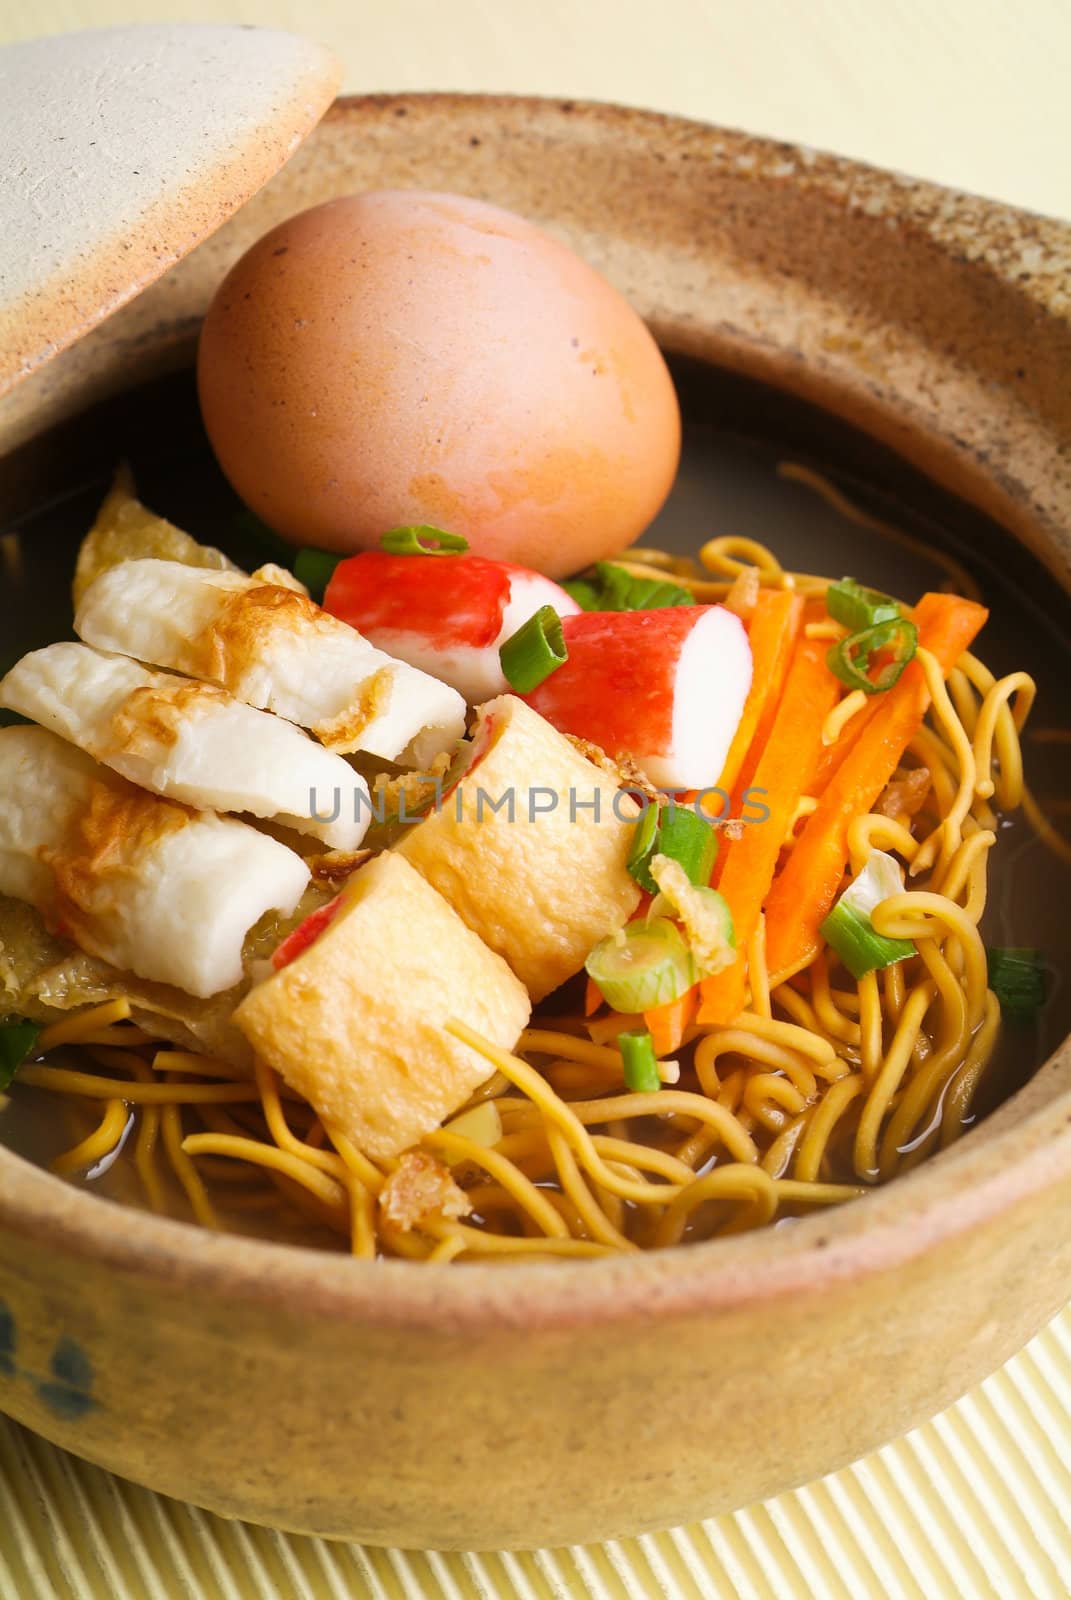 Claypo noodles. the asia food